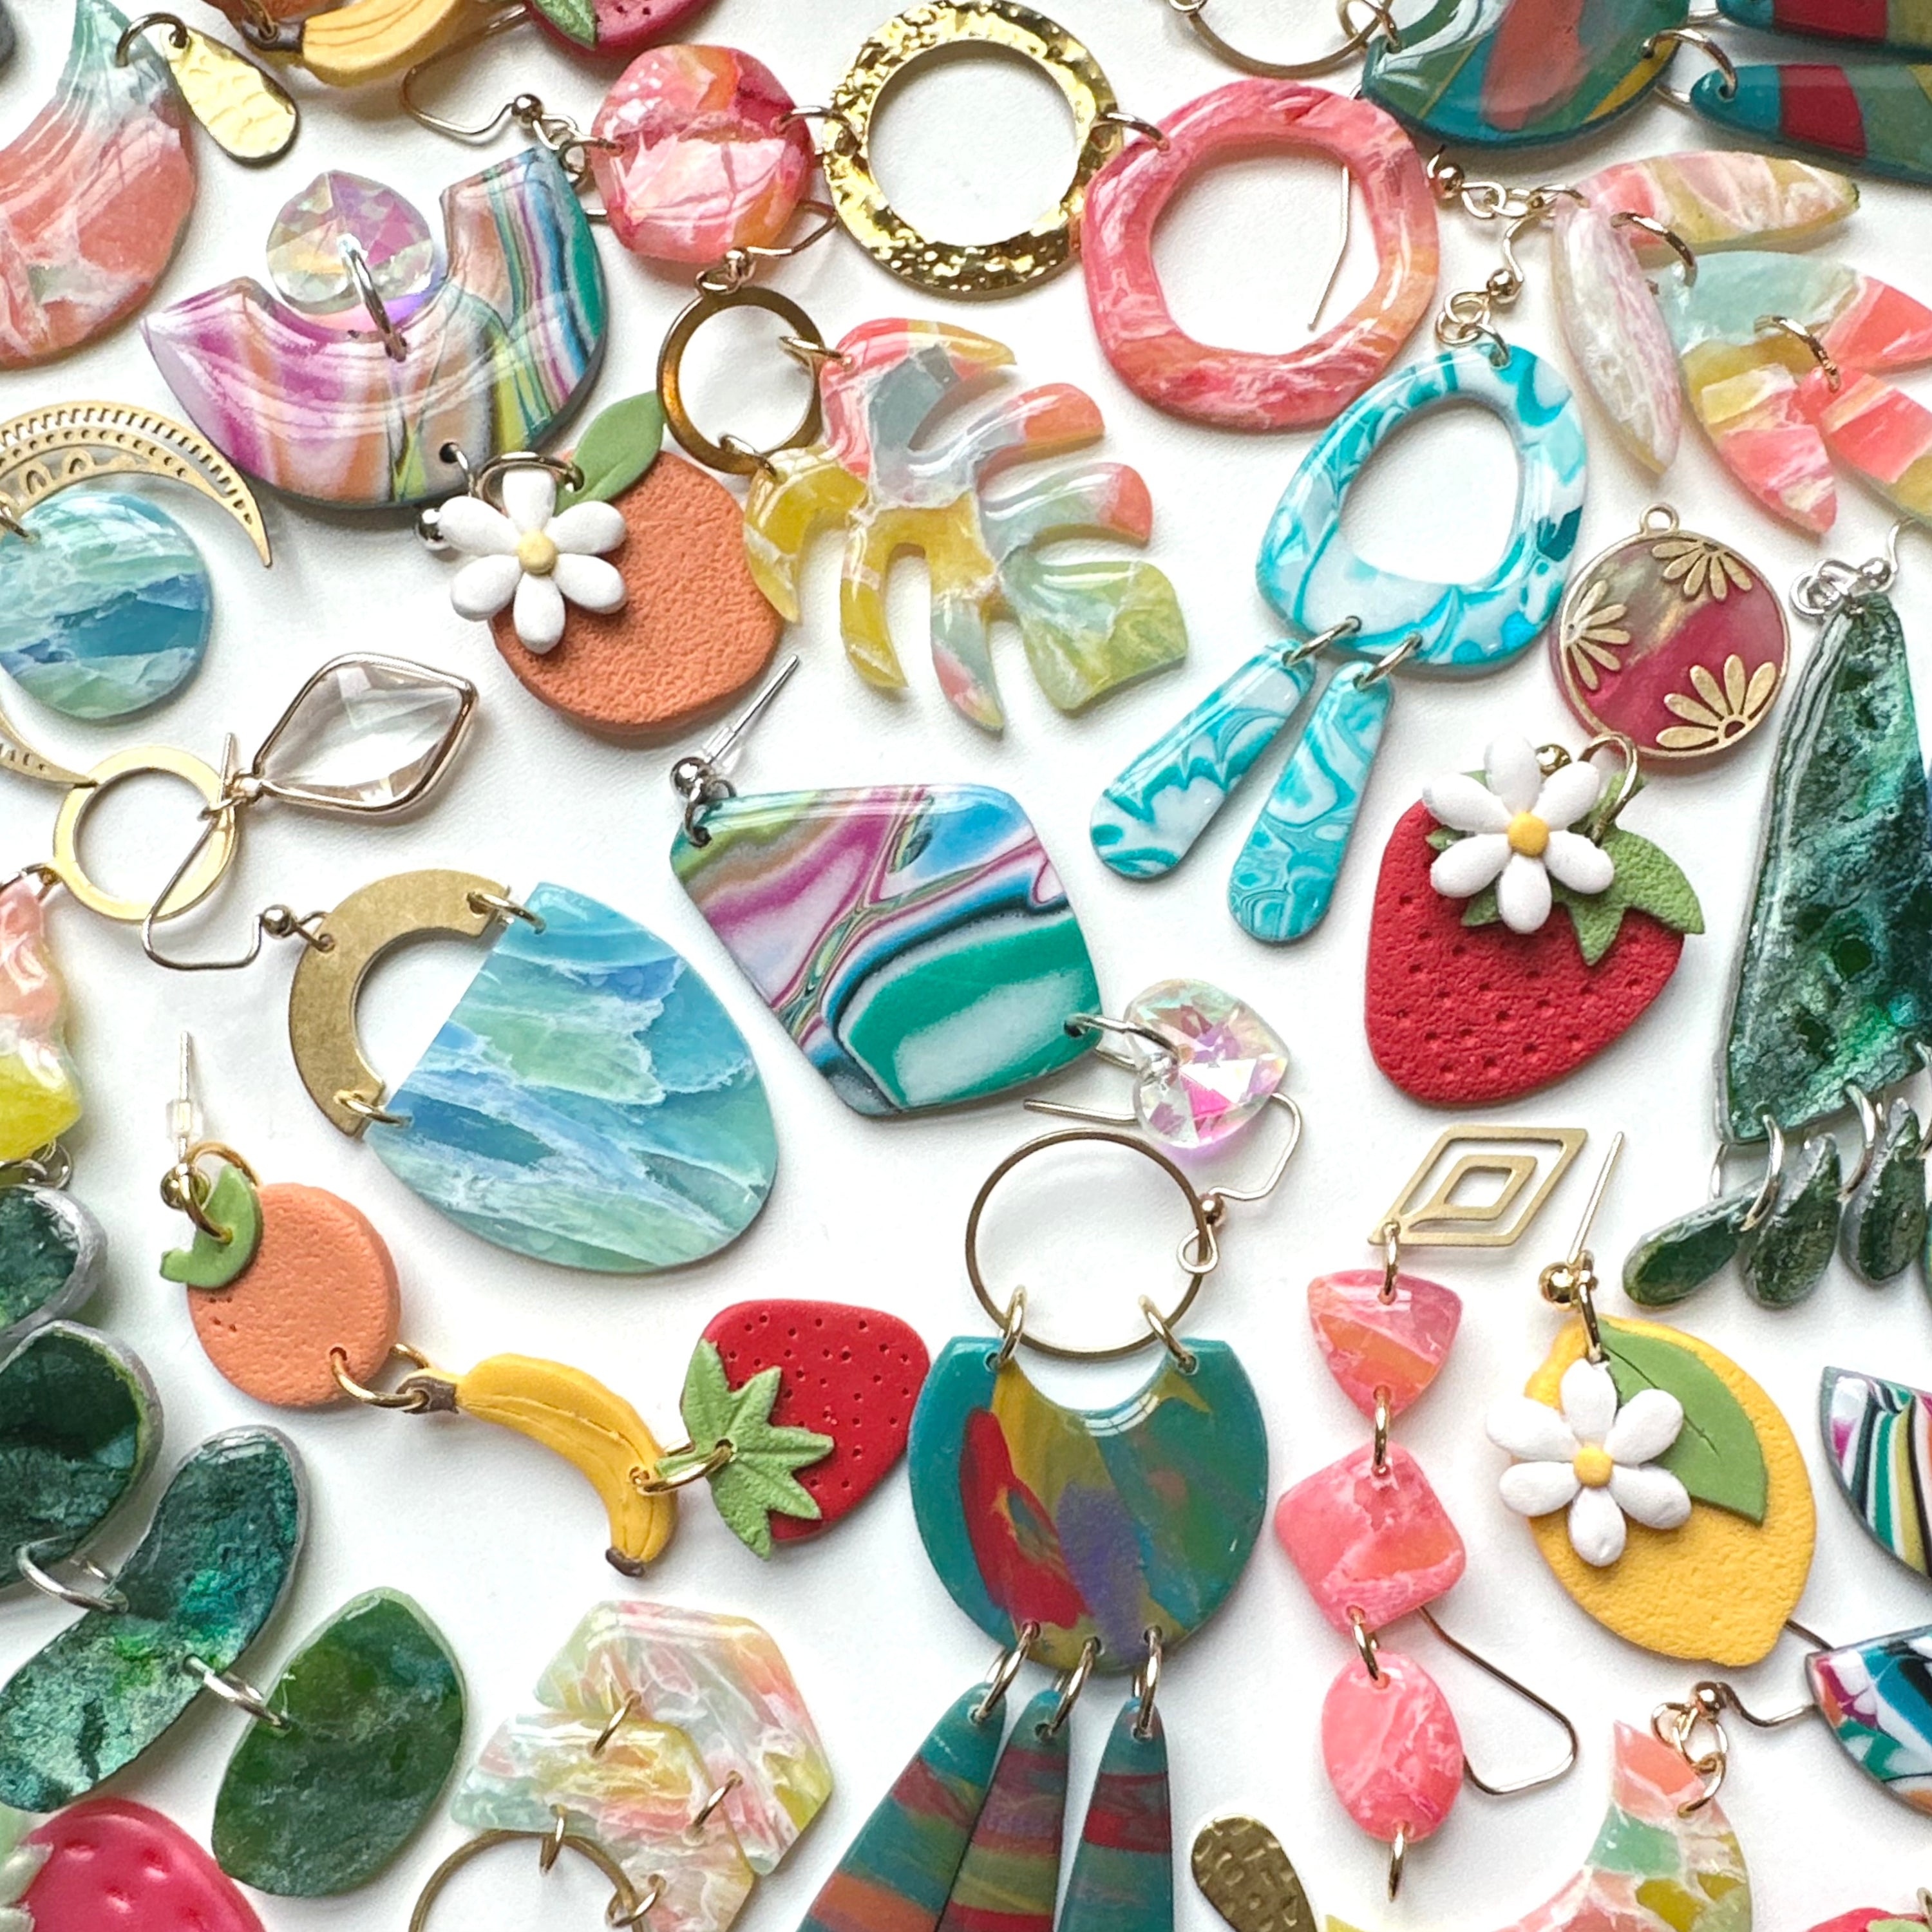 Various colorful earrings are displayed on a flat white background.